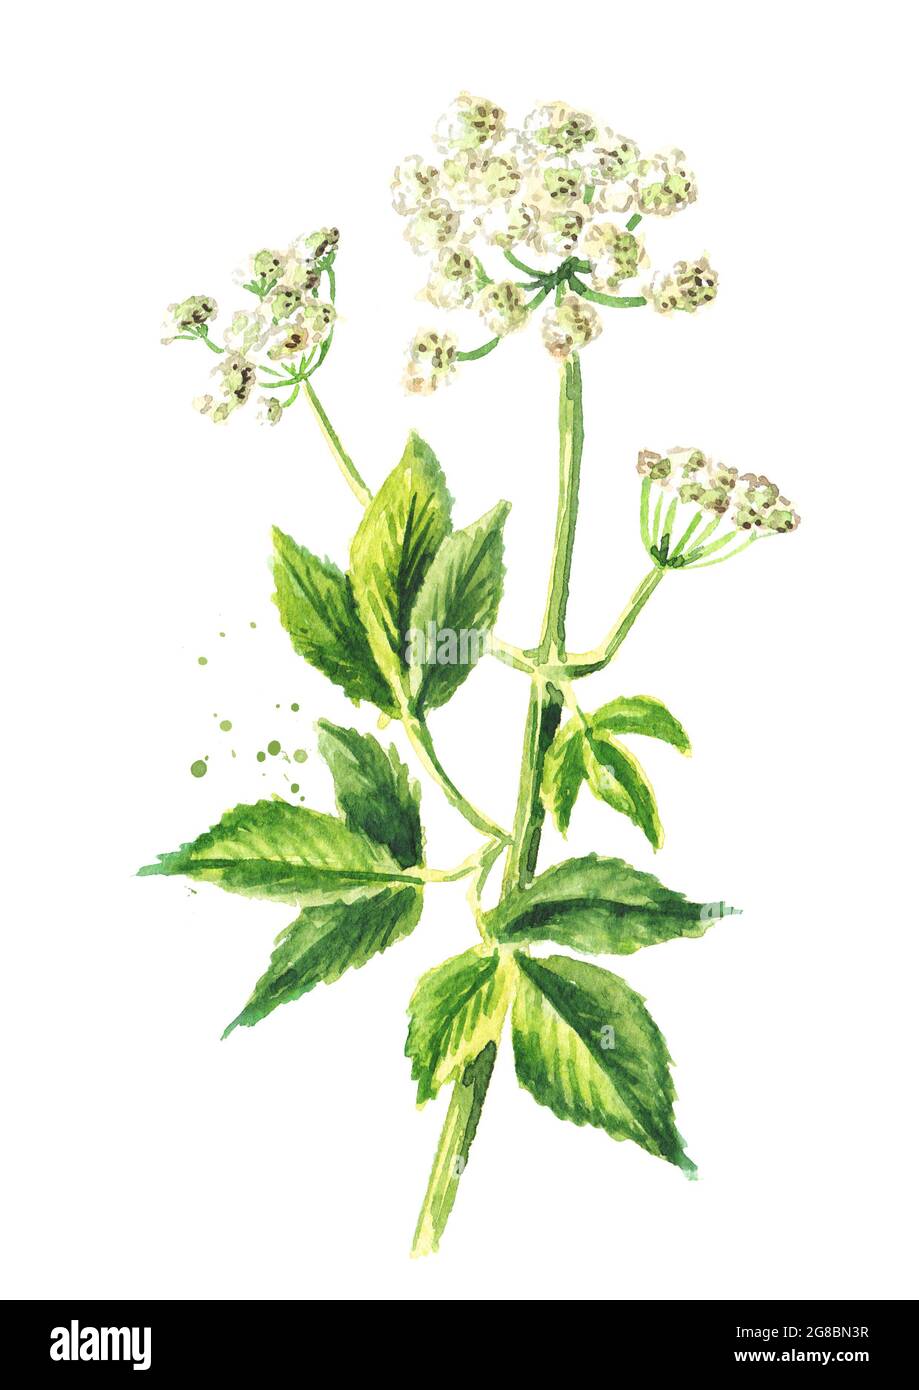 Medicinal plant Aegopodium podagraria or ground elder, stem, flowers and leaves, Watercolor hand drawn illustration isolated on white background Stock Photo